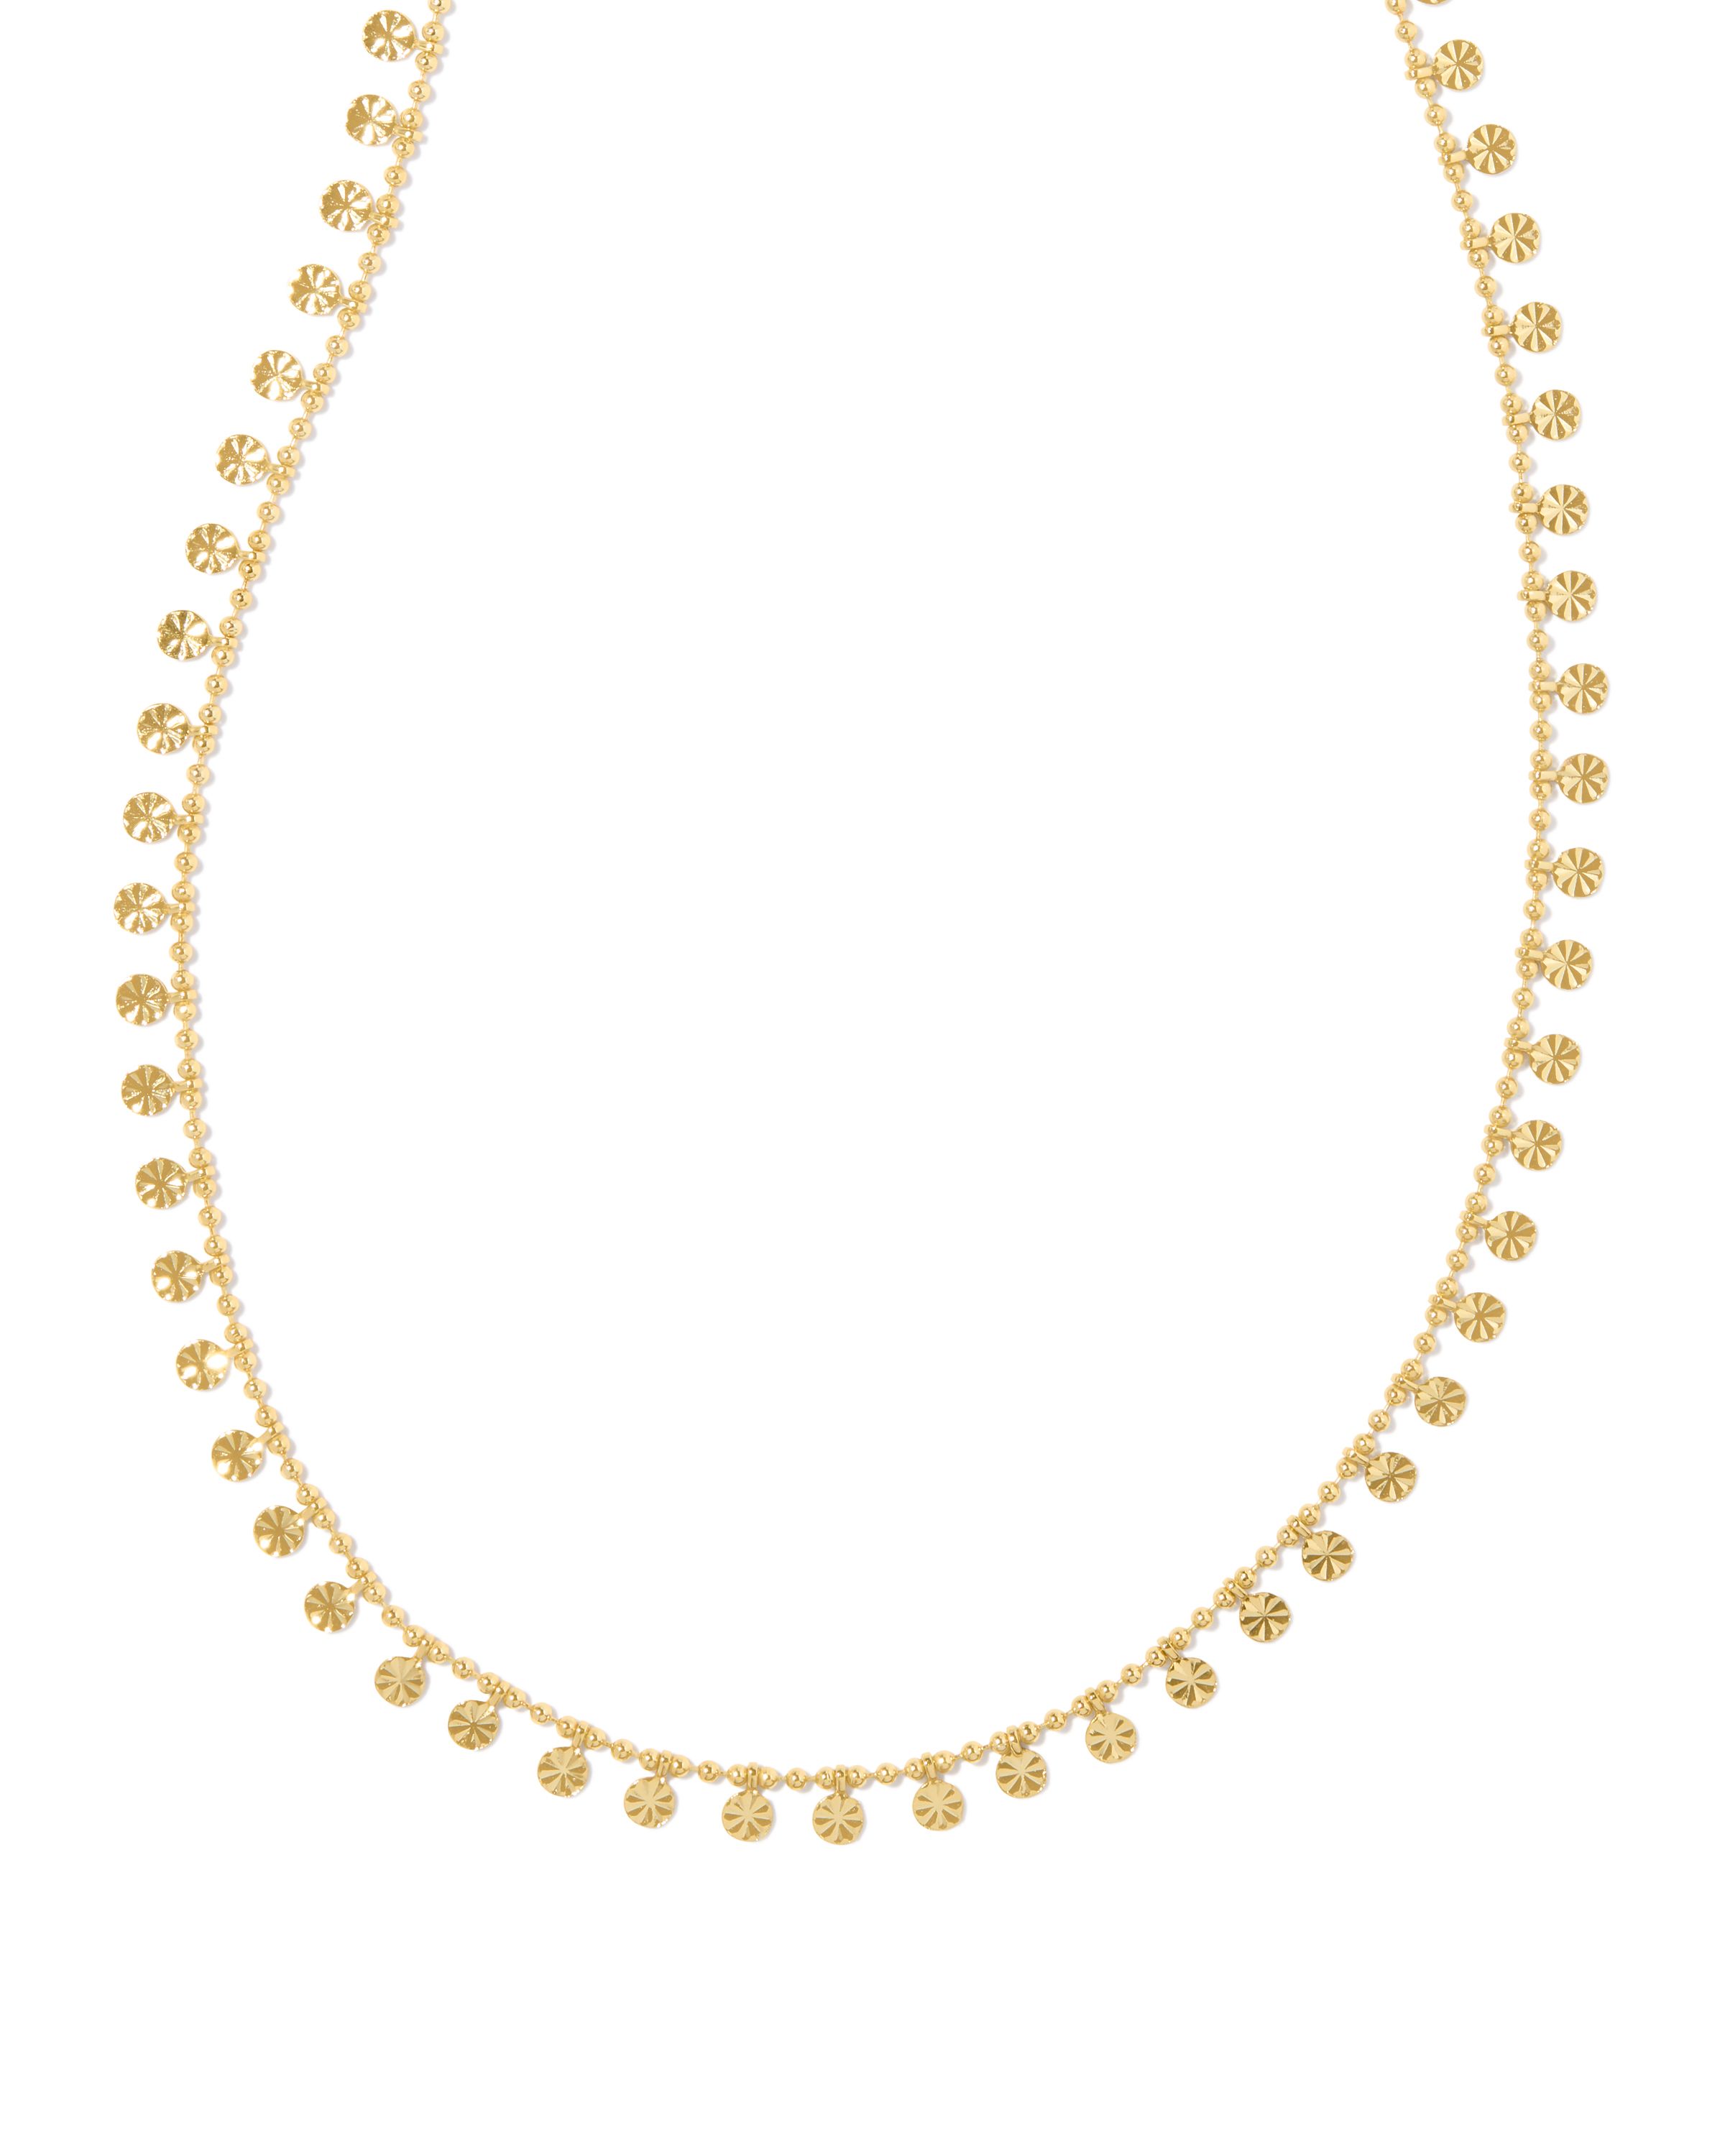 KENDRA SCOTT IVY GOLD TONE CHAIN NECKLACE